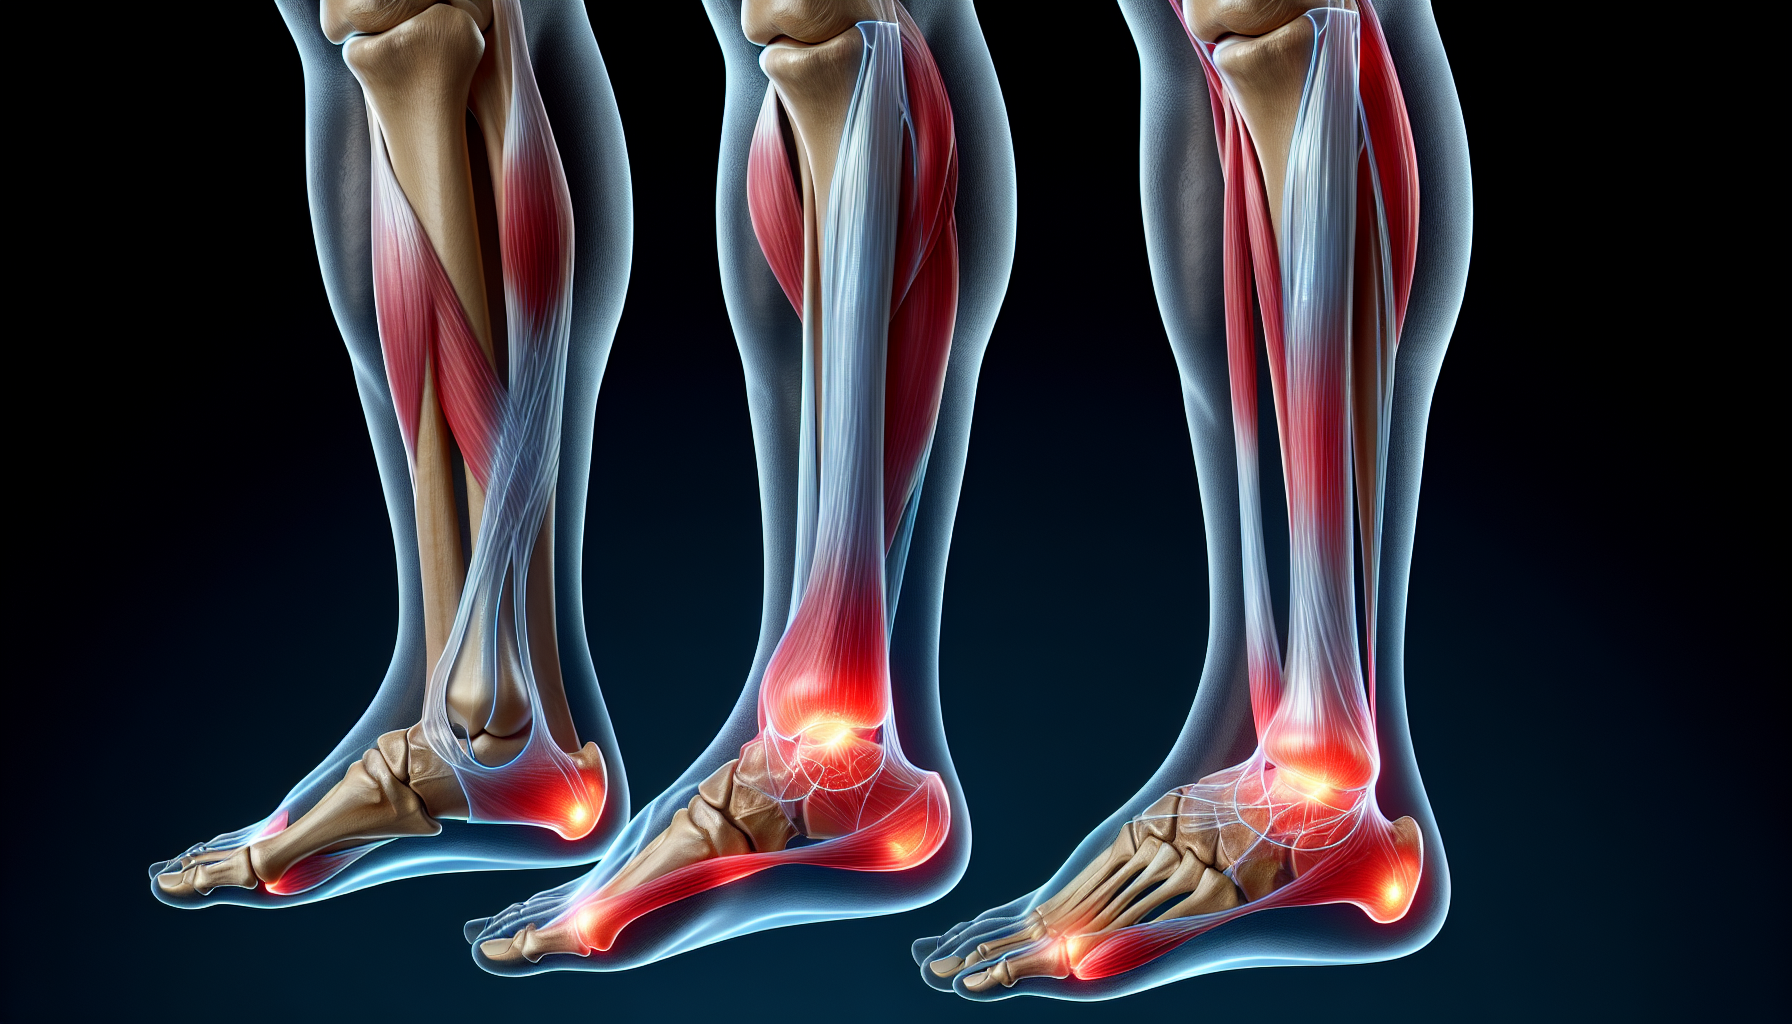 Comparison of insertional and mid-portion Achilles tendinopathy